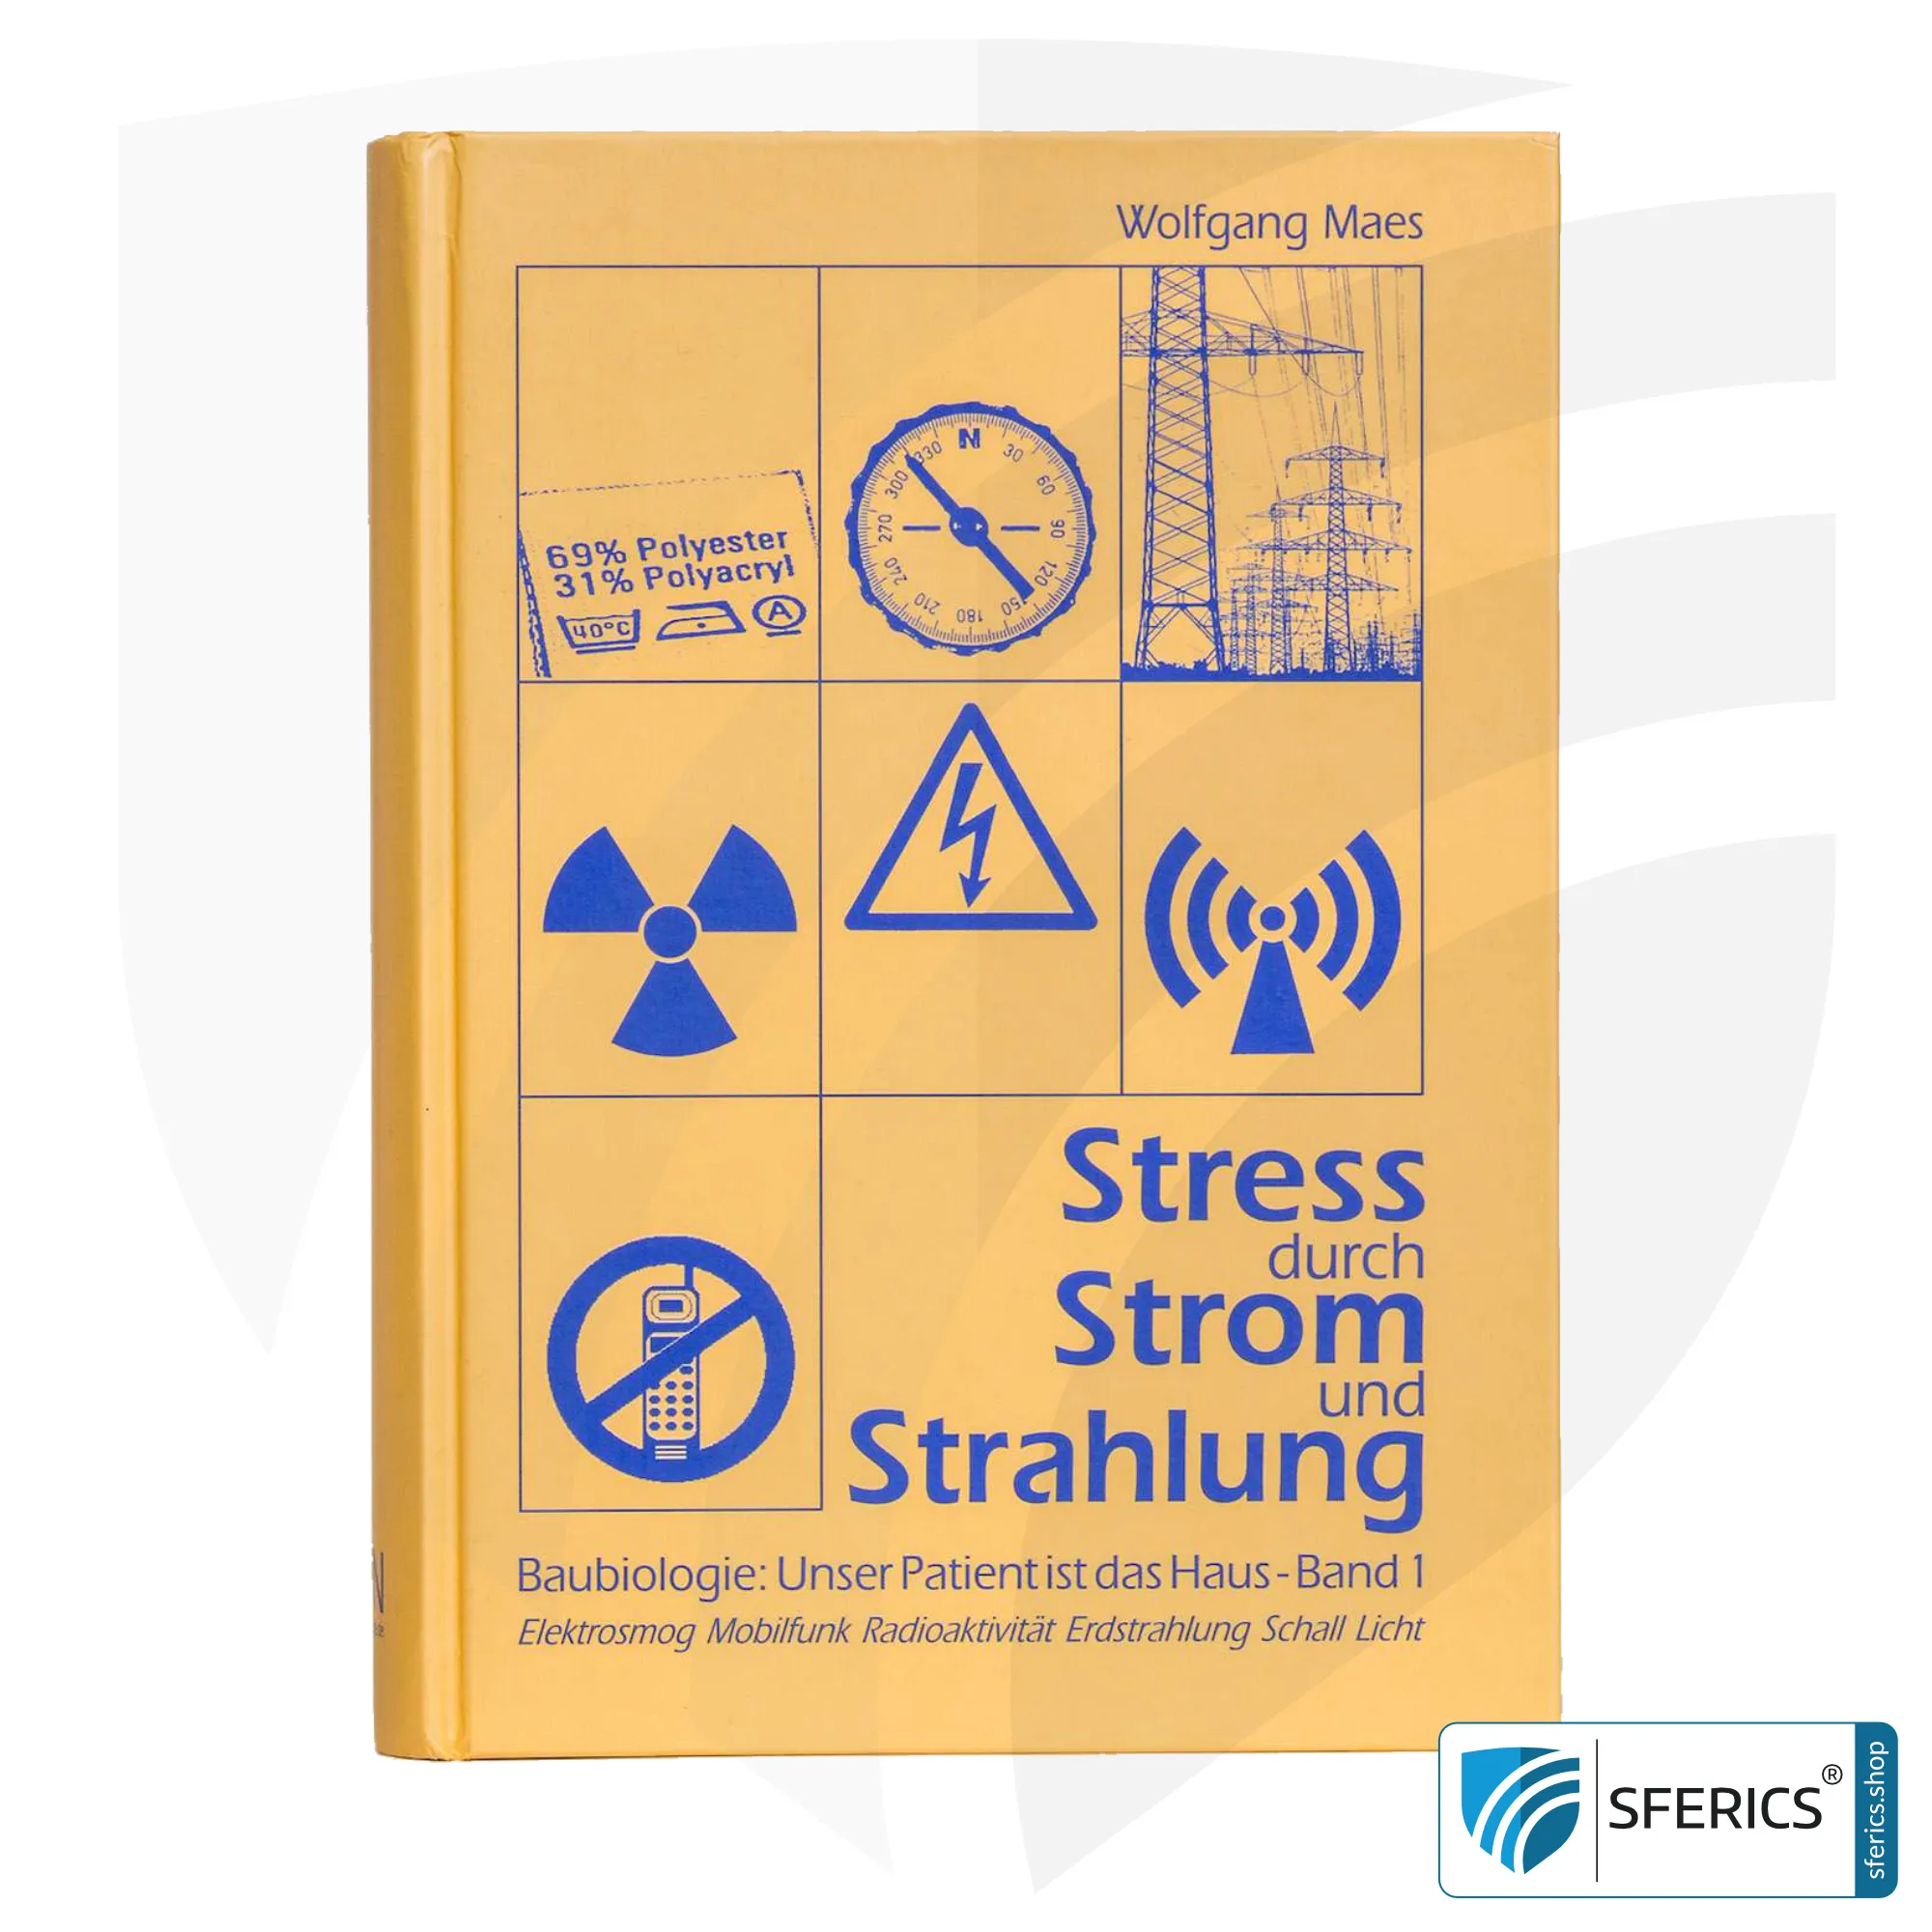 Stress from electricity and radiation by Wolfgang Maes | building biology: our patient is the house - volume 1 | electrosmog, mobile communications, radioactivity, natural radiation, sound, light